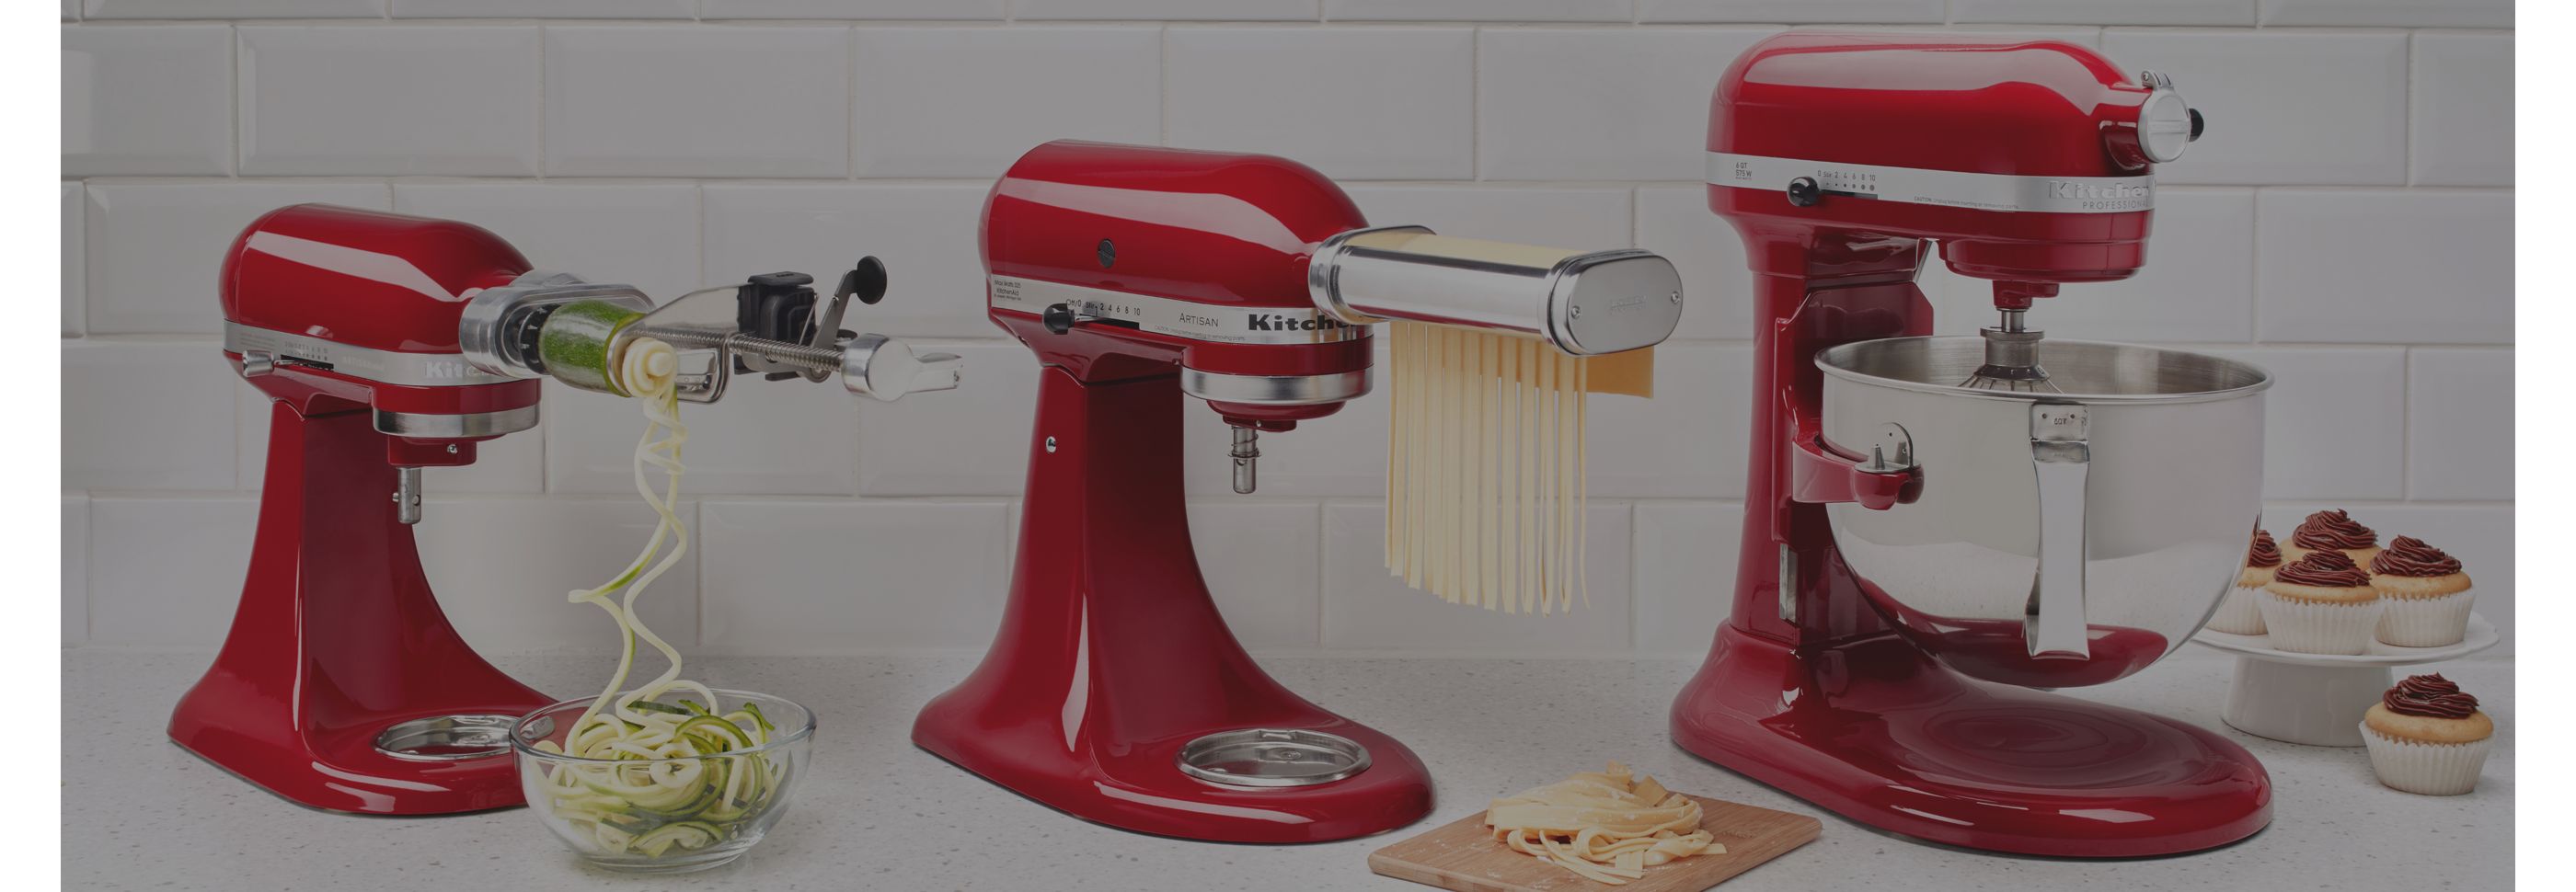 Stand Mixer Buying Guide Kitchenaid